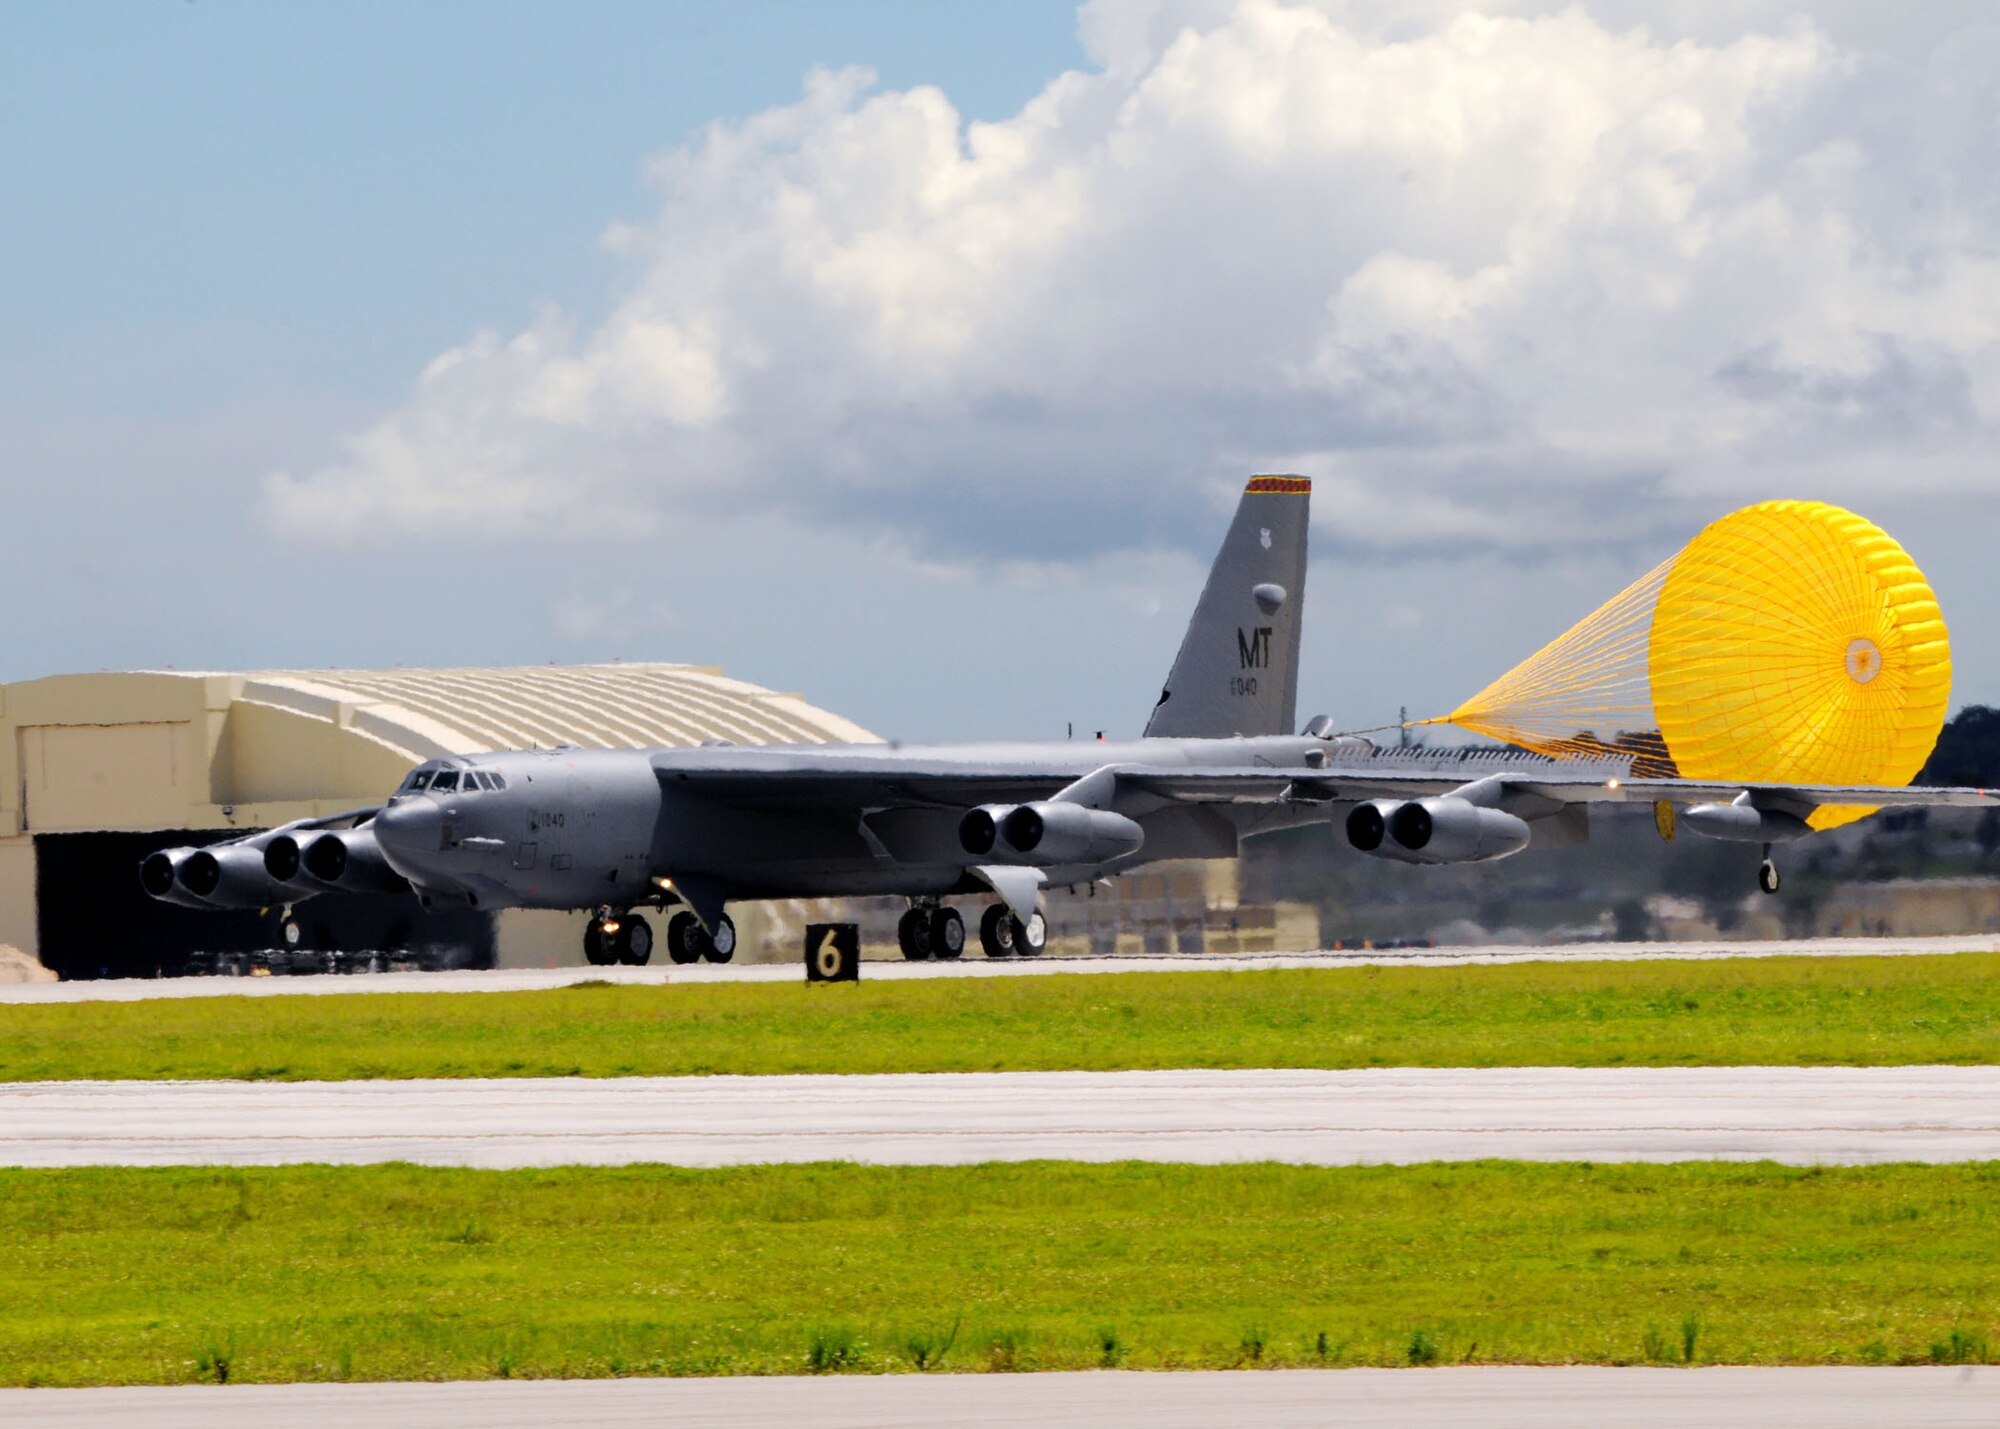 Maj. Gen. Floyd Carpenter, 8th Air Force commander, arrives on a B-52 Stratofortress to visit Airmen deployed to Andersen Air Force Base, Guam on Aug. 29, 2010. General Carpenter flew more than 17 hours non-stop from Barksdale Air Force Base, La., to Andersen Air Force Base for a site visit. During his visit General Carpenter got a first-hand look at what the deployed Airmen do daily to support the 36th Wing and U.S. Pacific Command's continuous bomber presence mission. (U.S. Air Force photo by Senior Airman Nichelle Anderson)